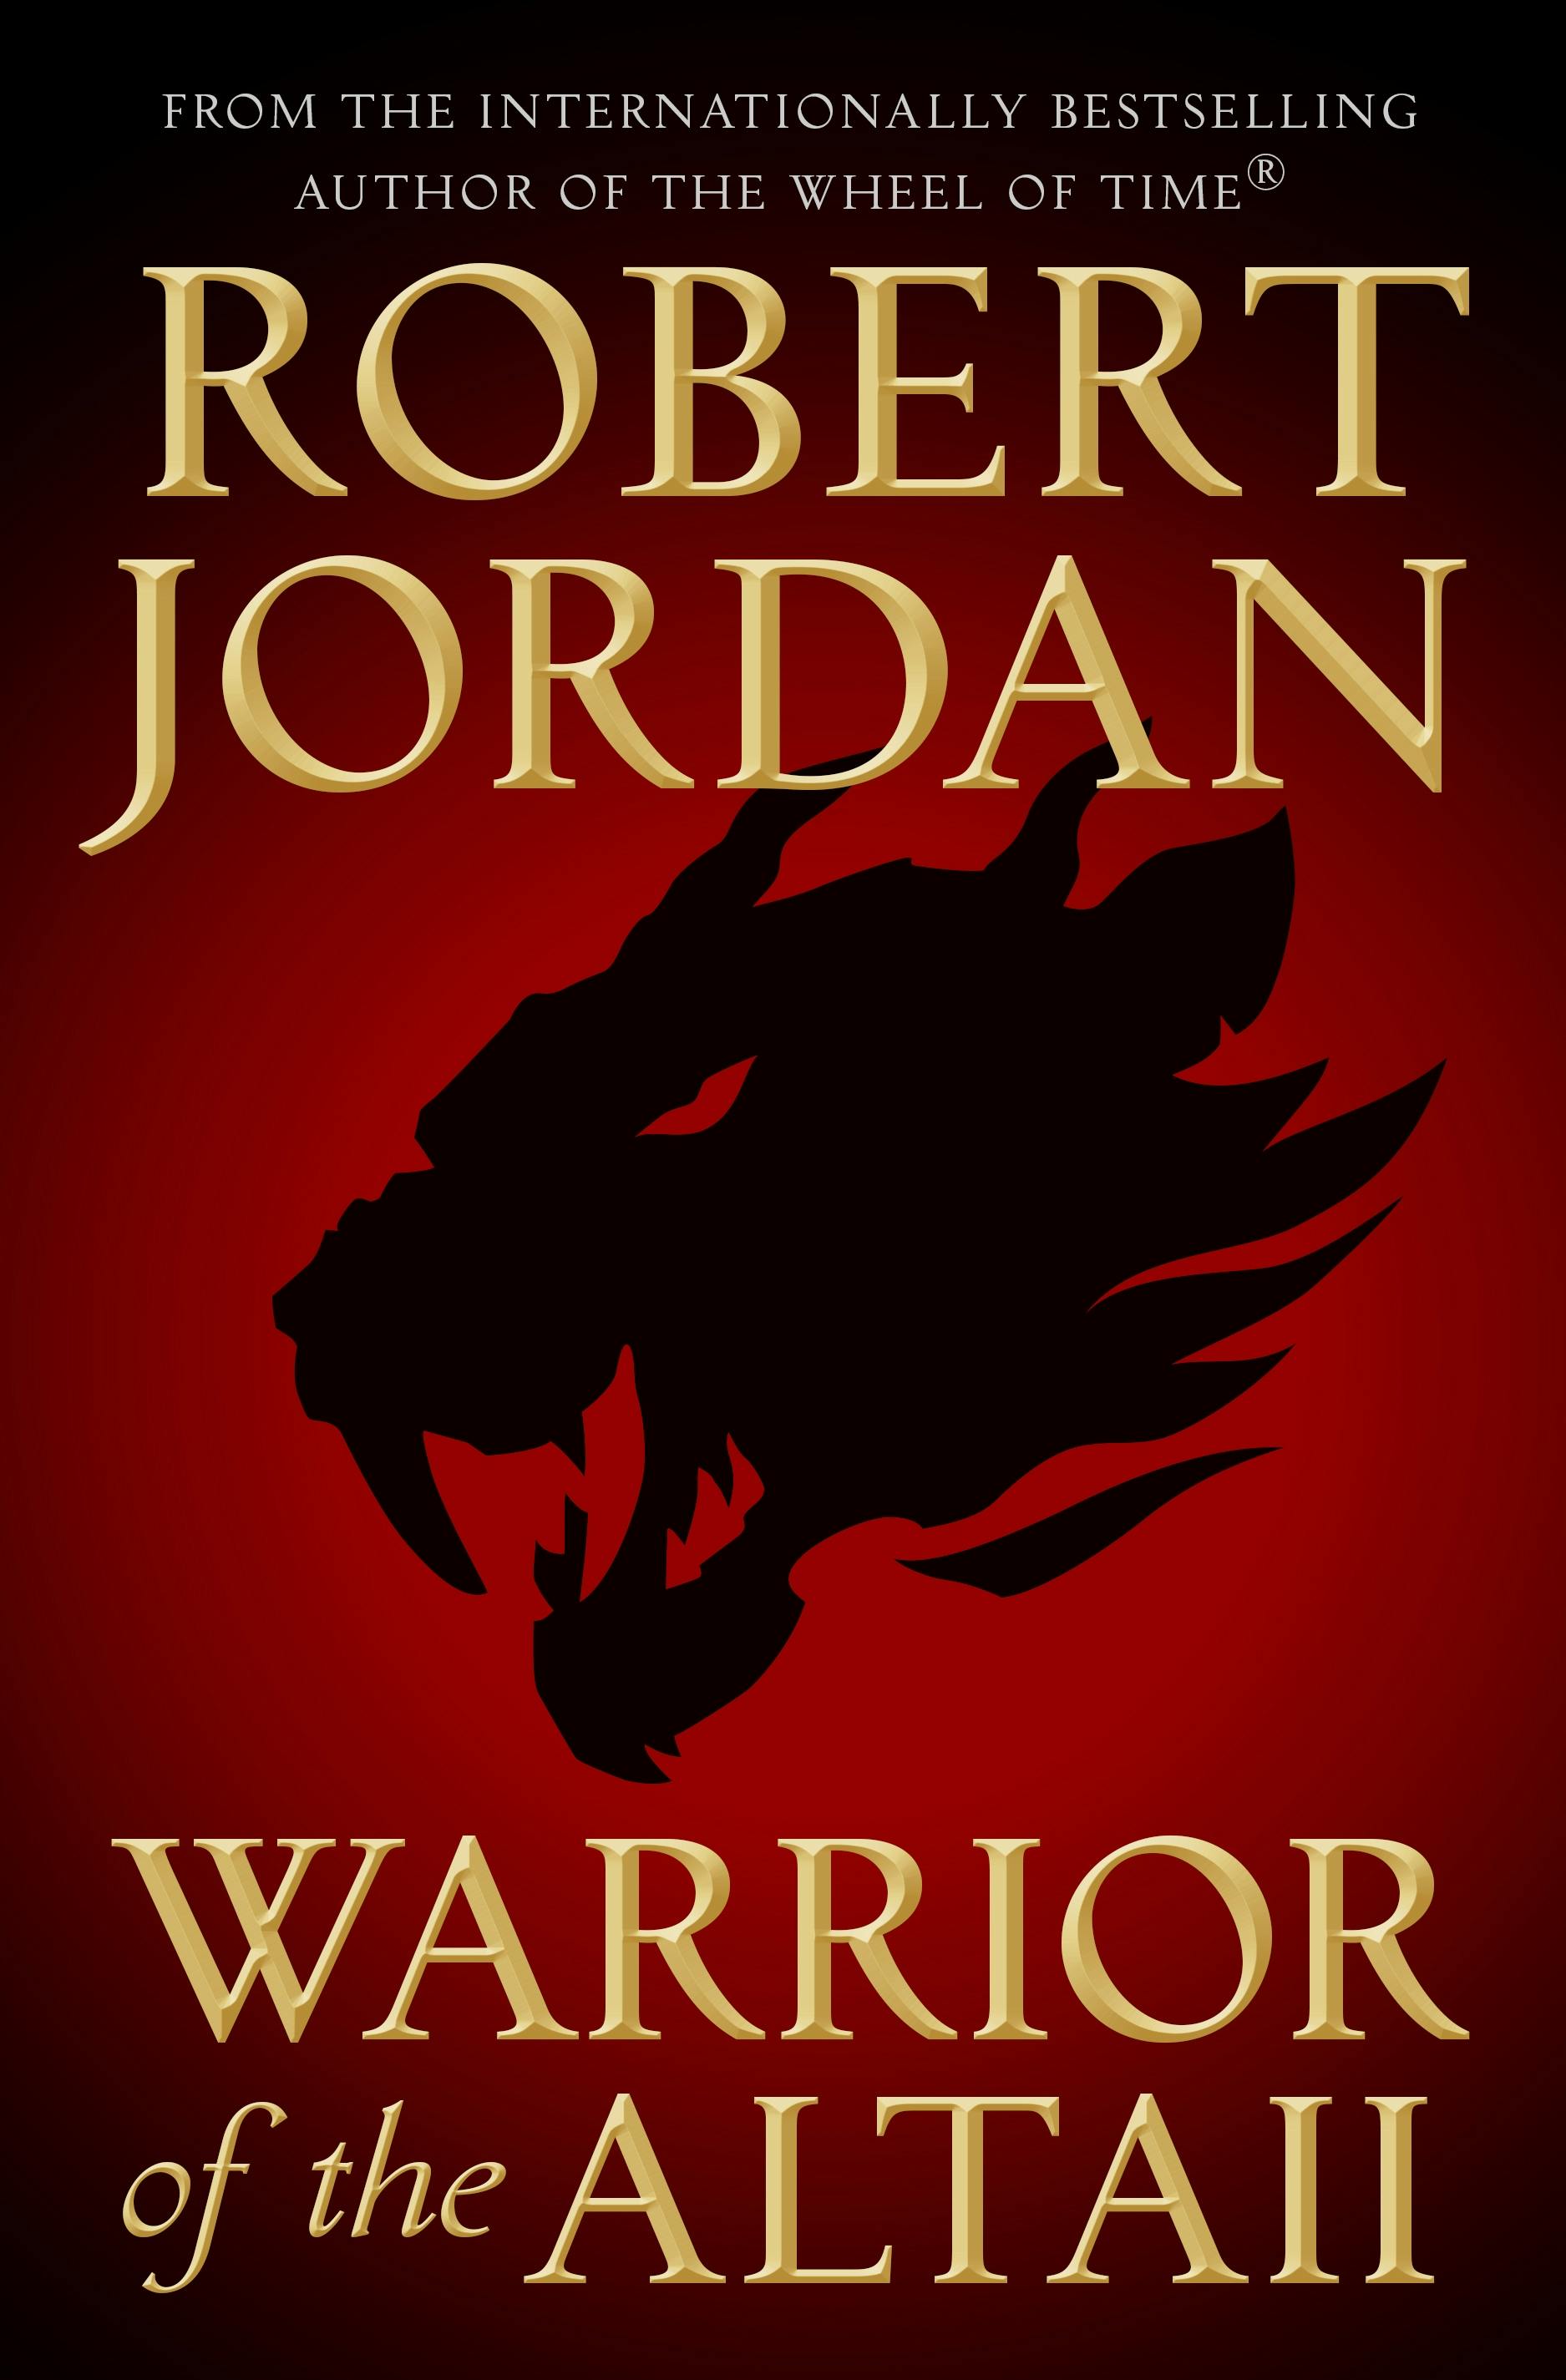 Cover for the book titled as: Warrior of the Altaii